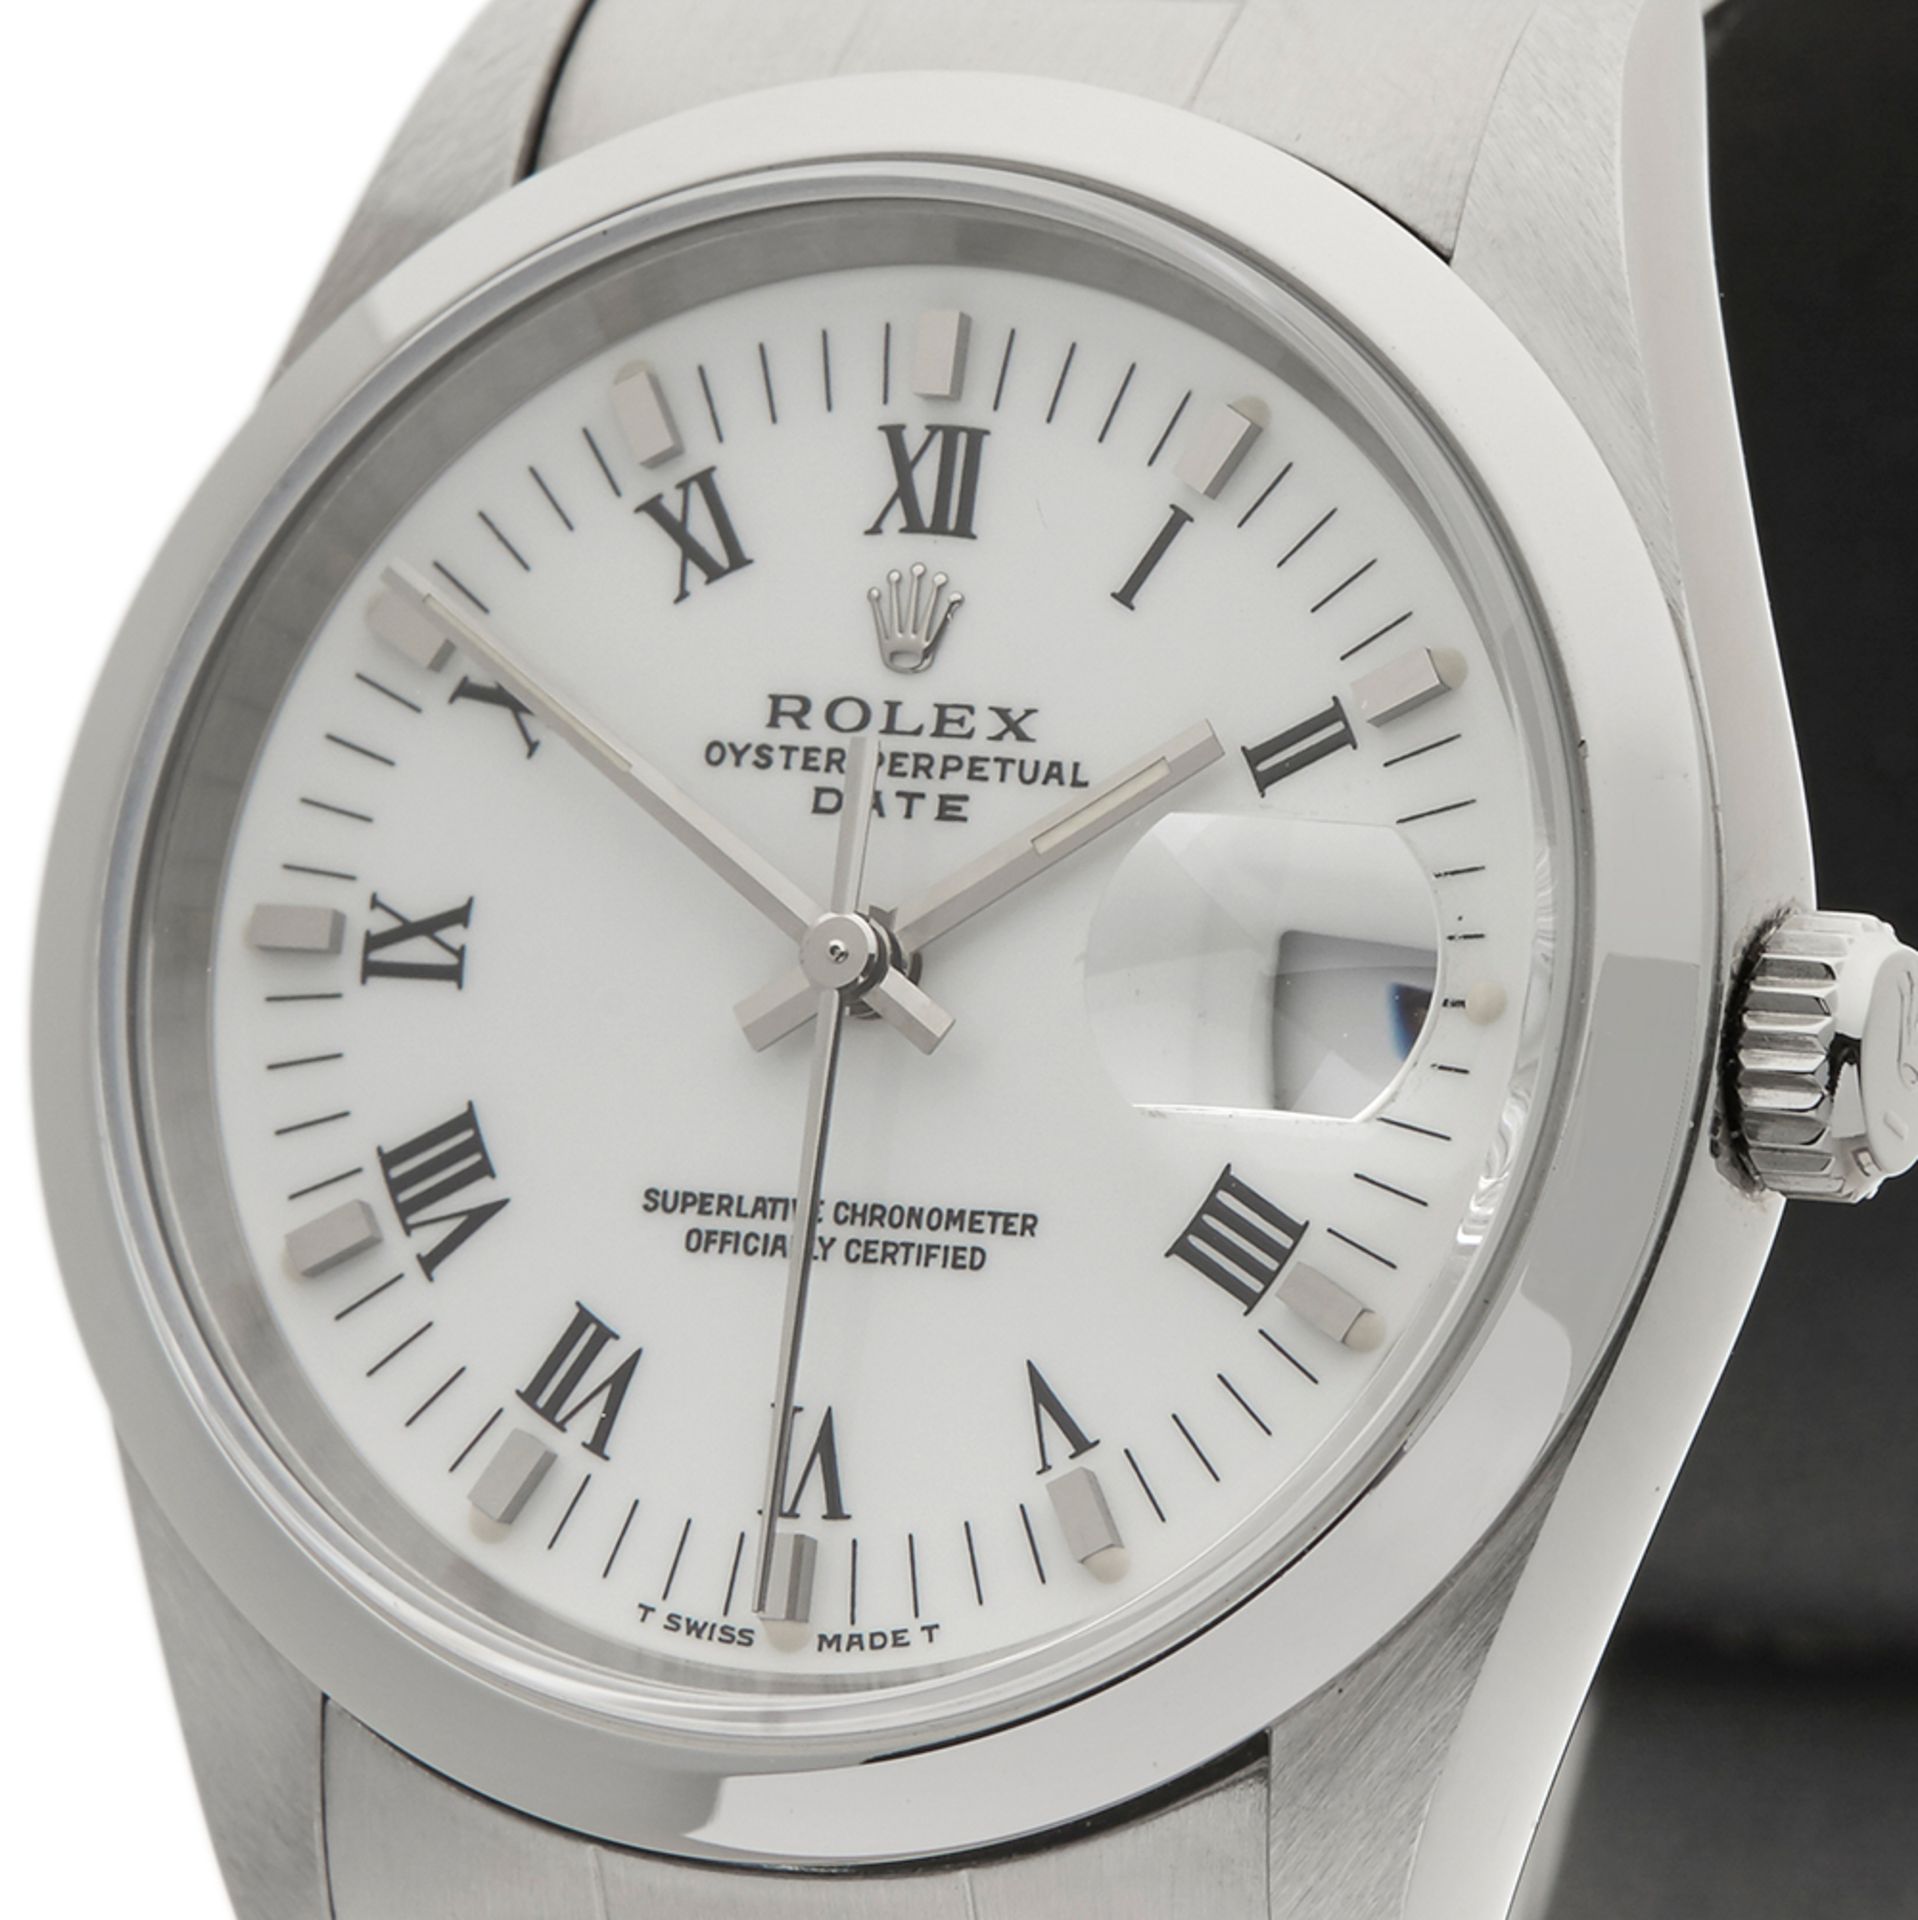 Rolex Oyster Perpetual 34mm Stainless Steel 15200 - Image 3 of 8